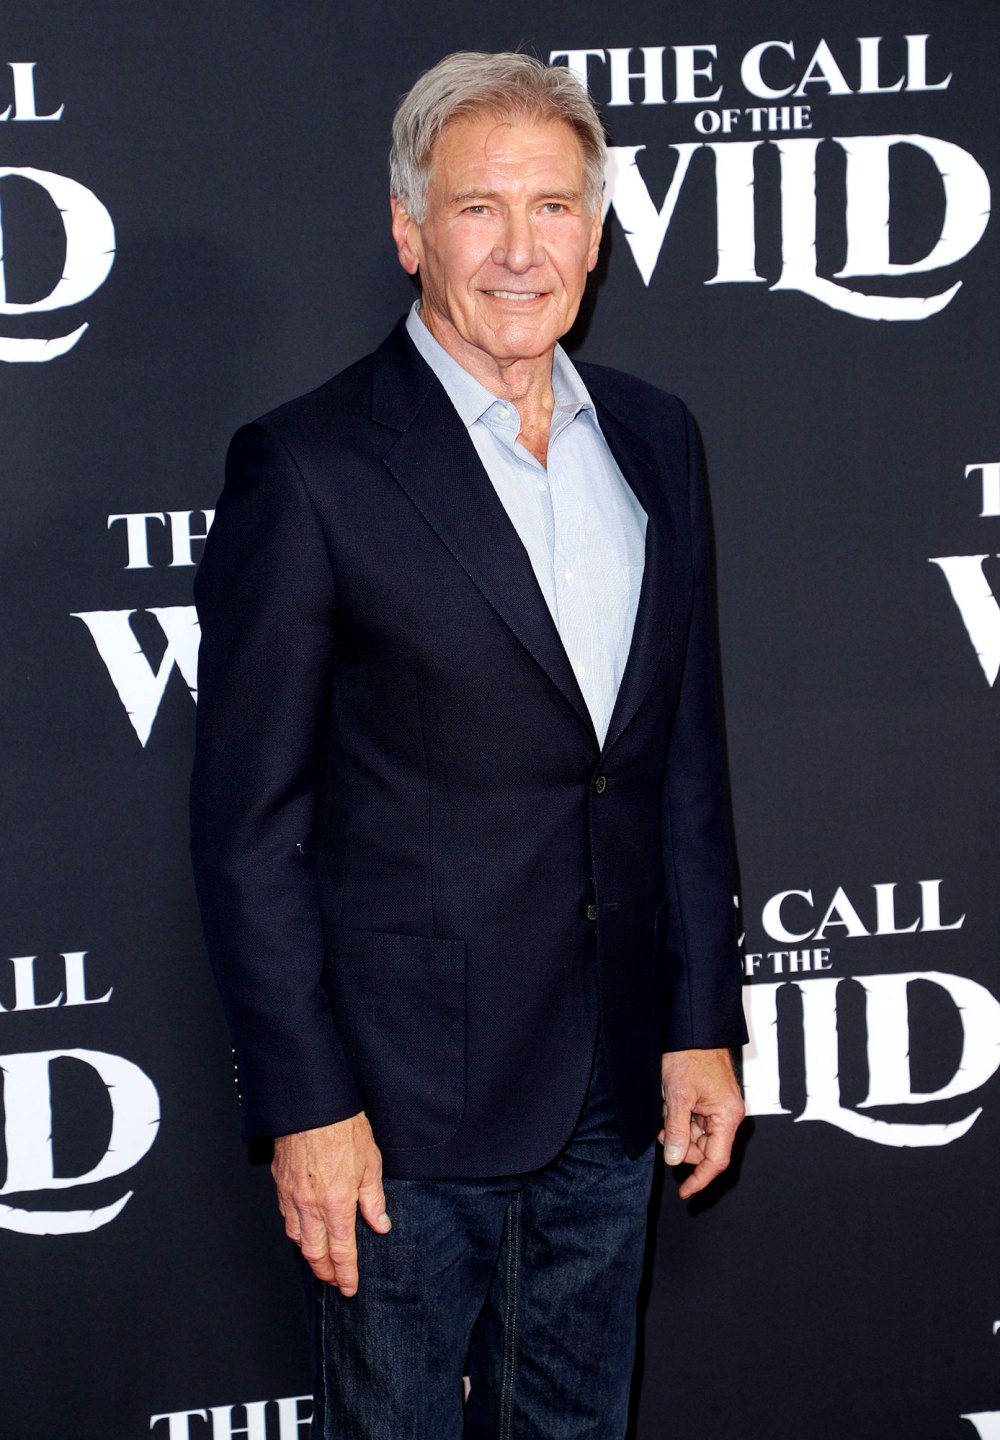 Harrison Ford Says He Hasn't Been the Best Parent to His 5 Kids